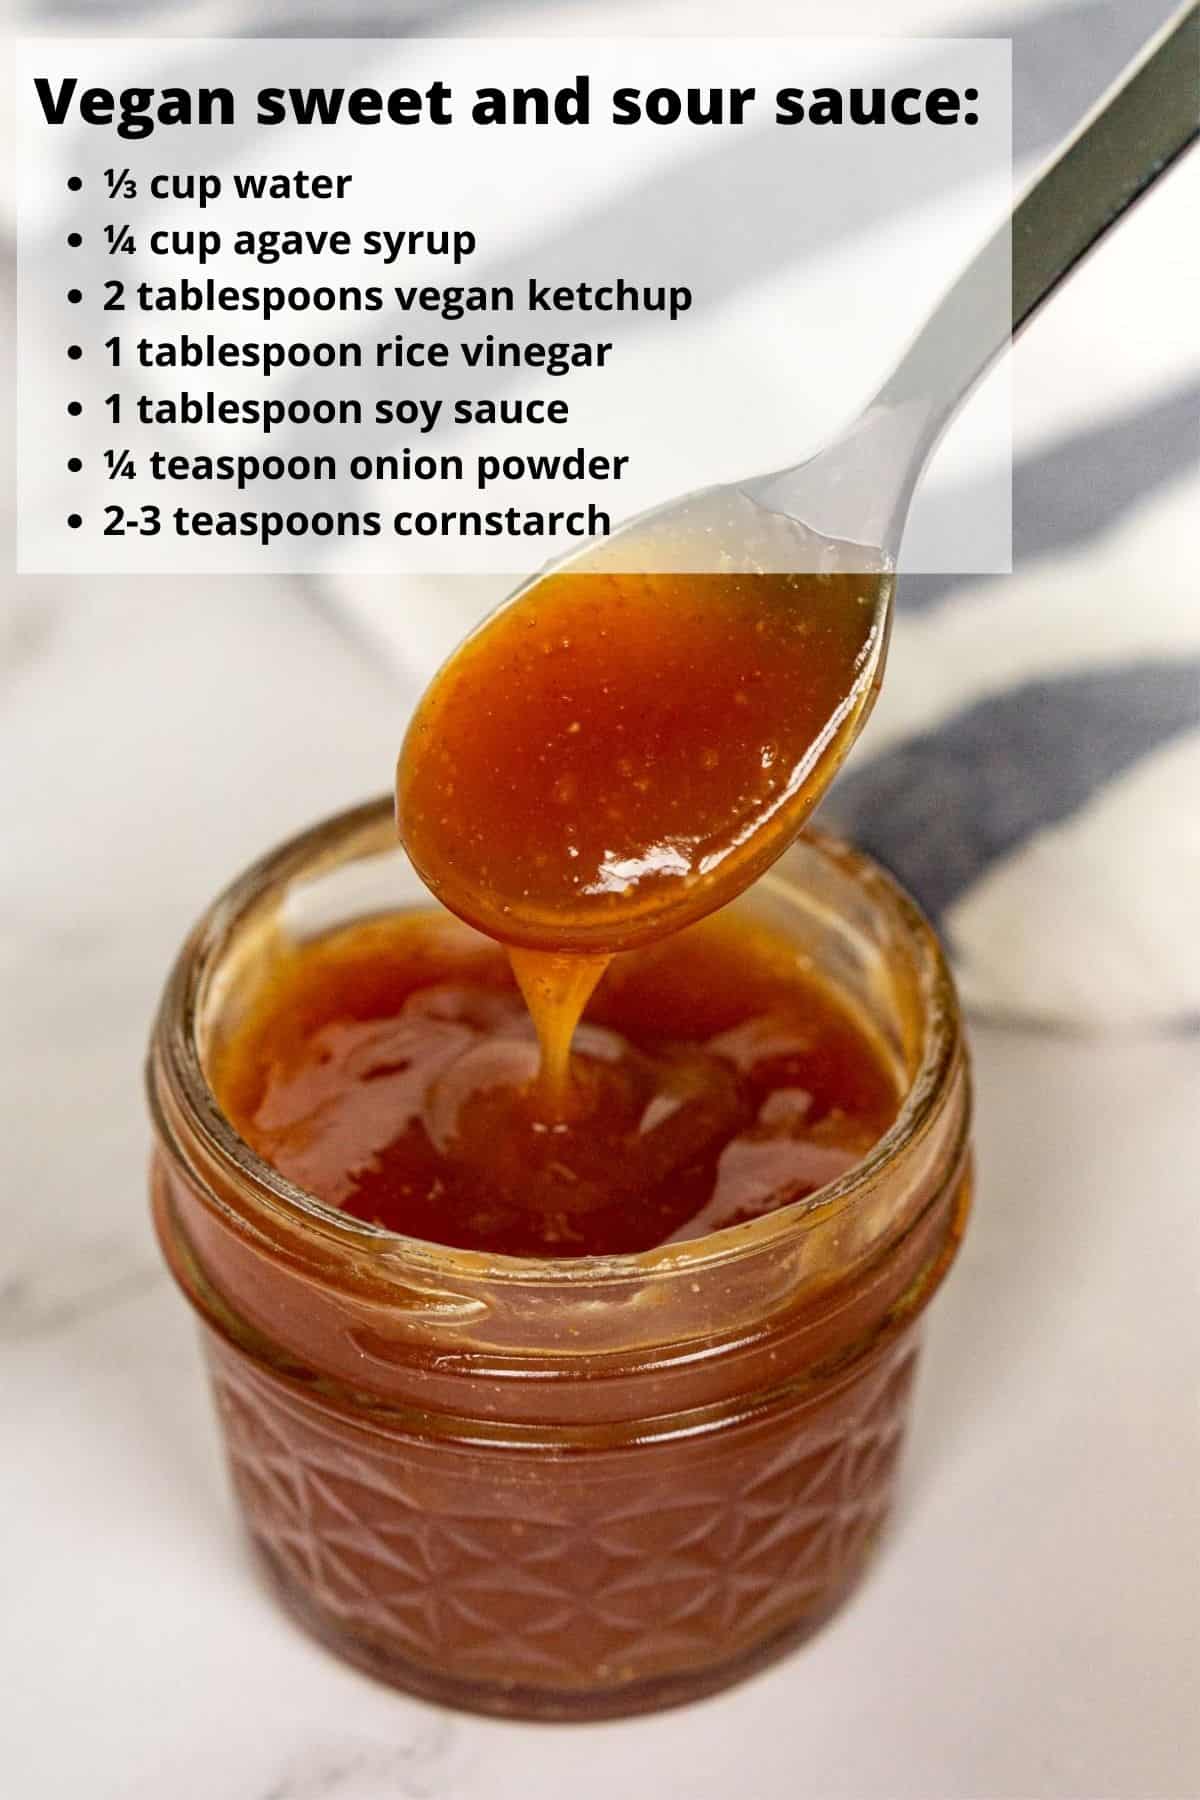 Vegan sweet and sour sauce in a small jar with text listing ingredients.